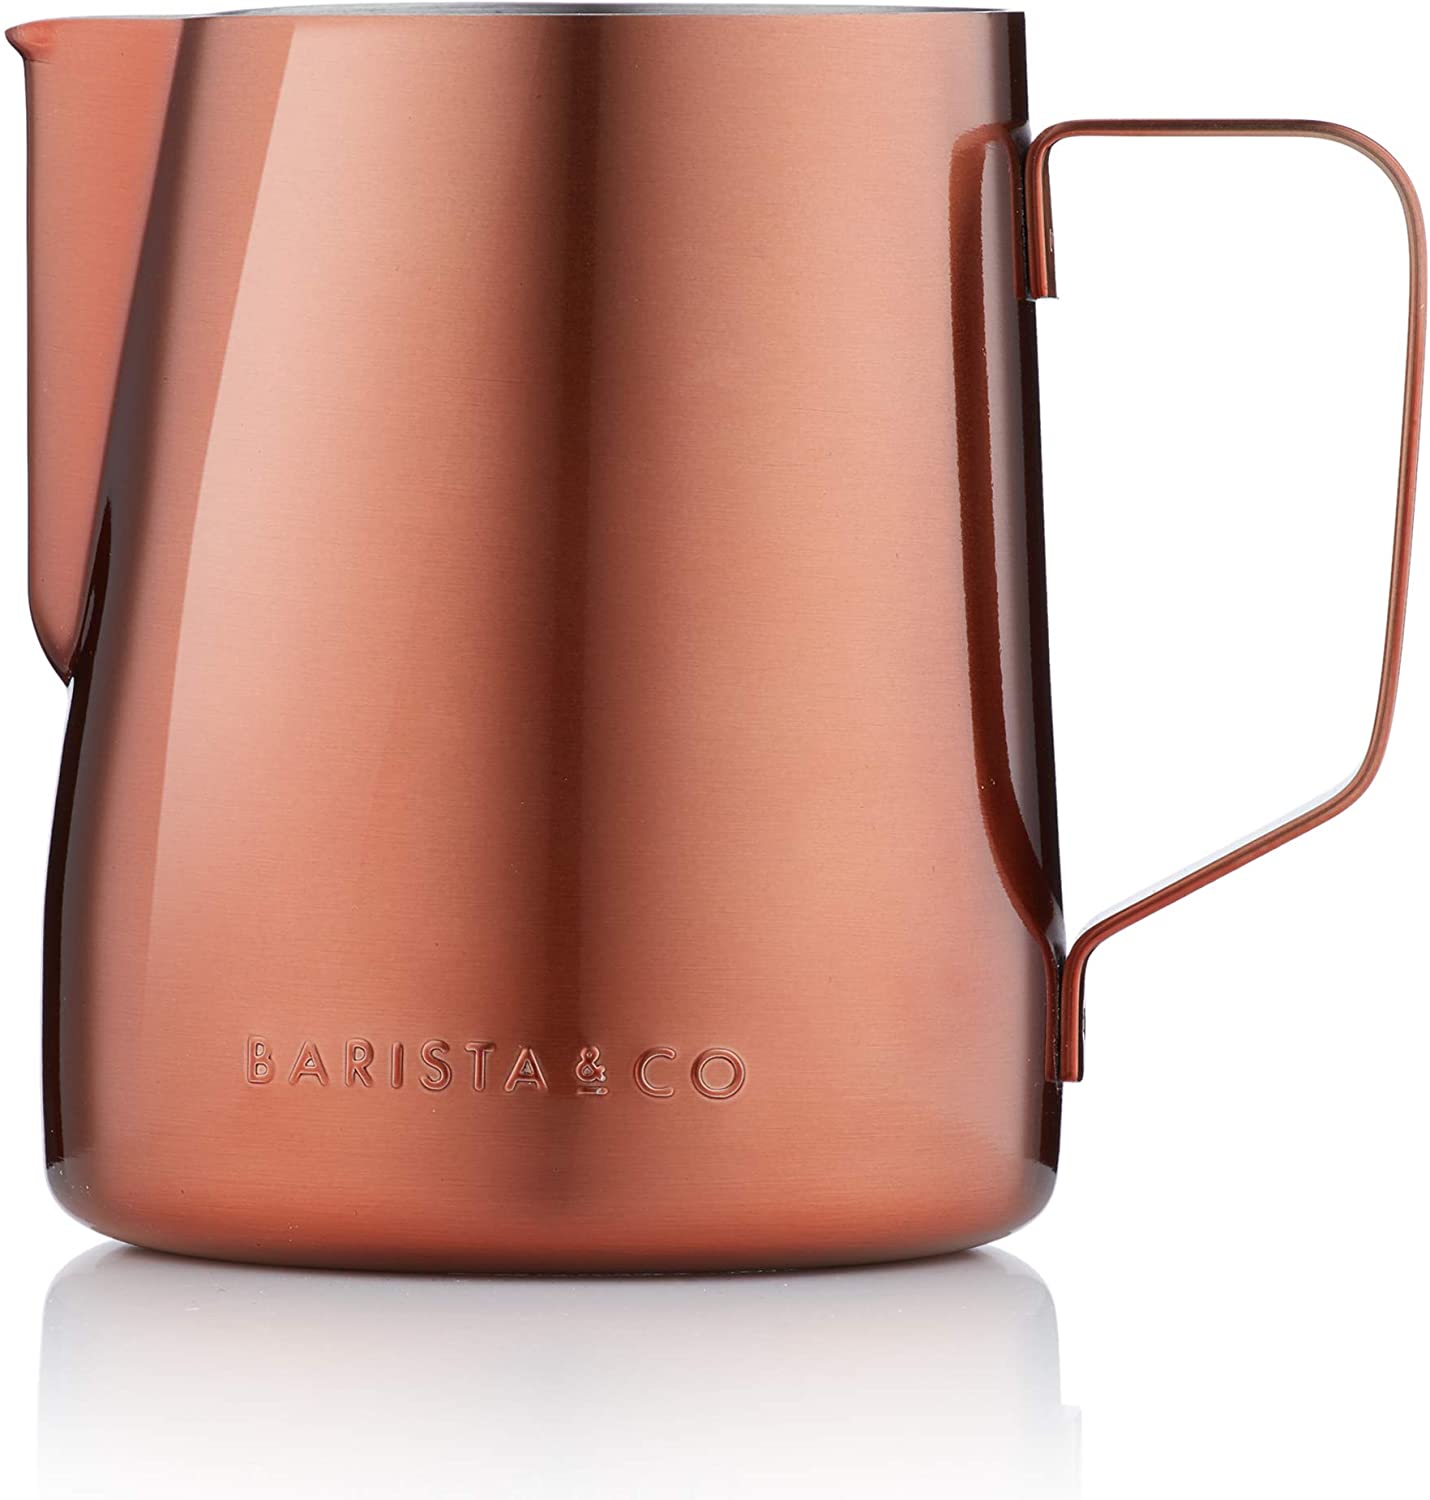 Barista & Co Stainless Steel Milk Jug 600ml Perfect for Milk Jug Cappuccino Copper